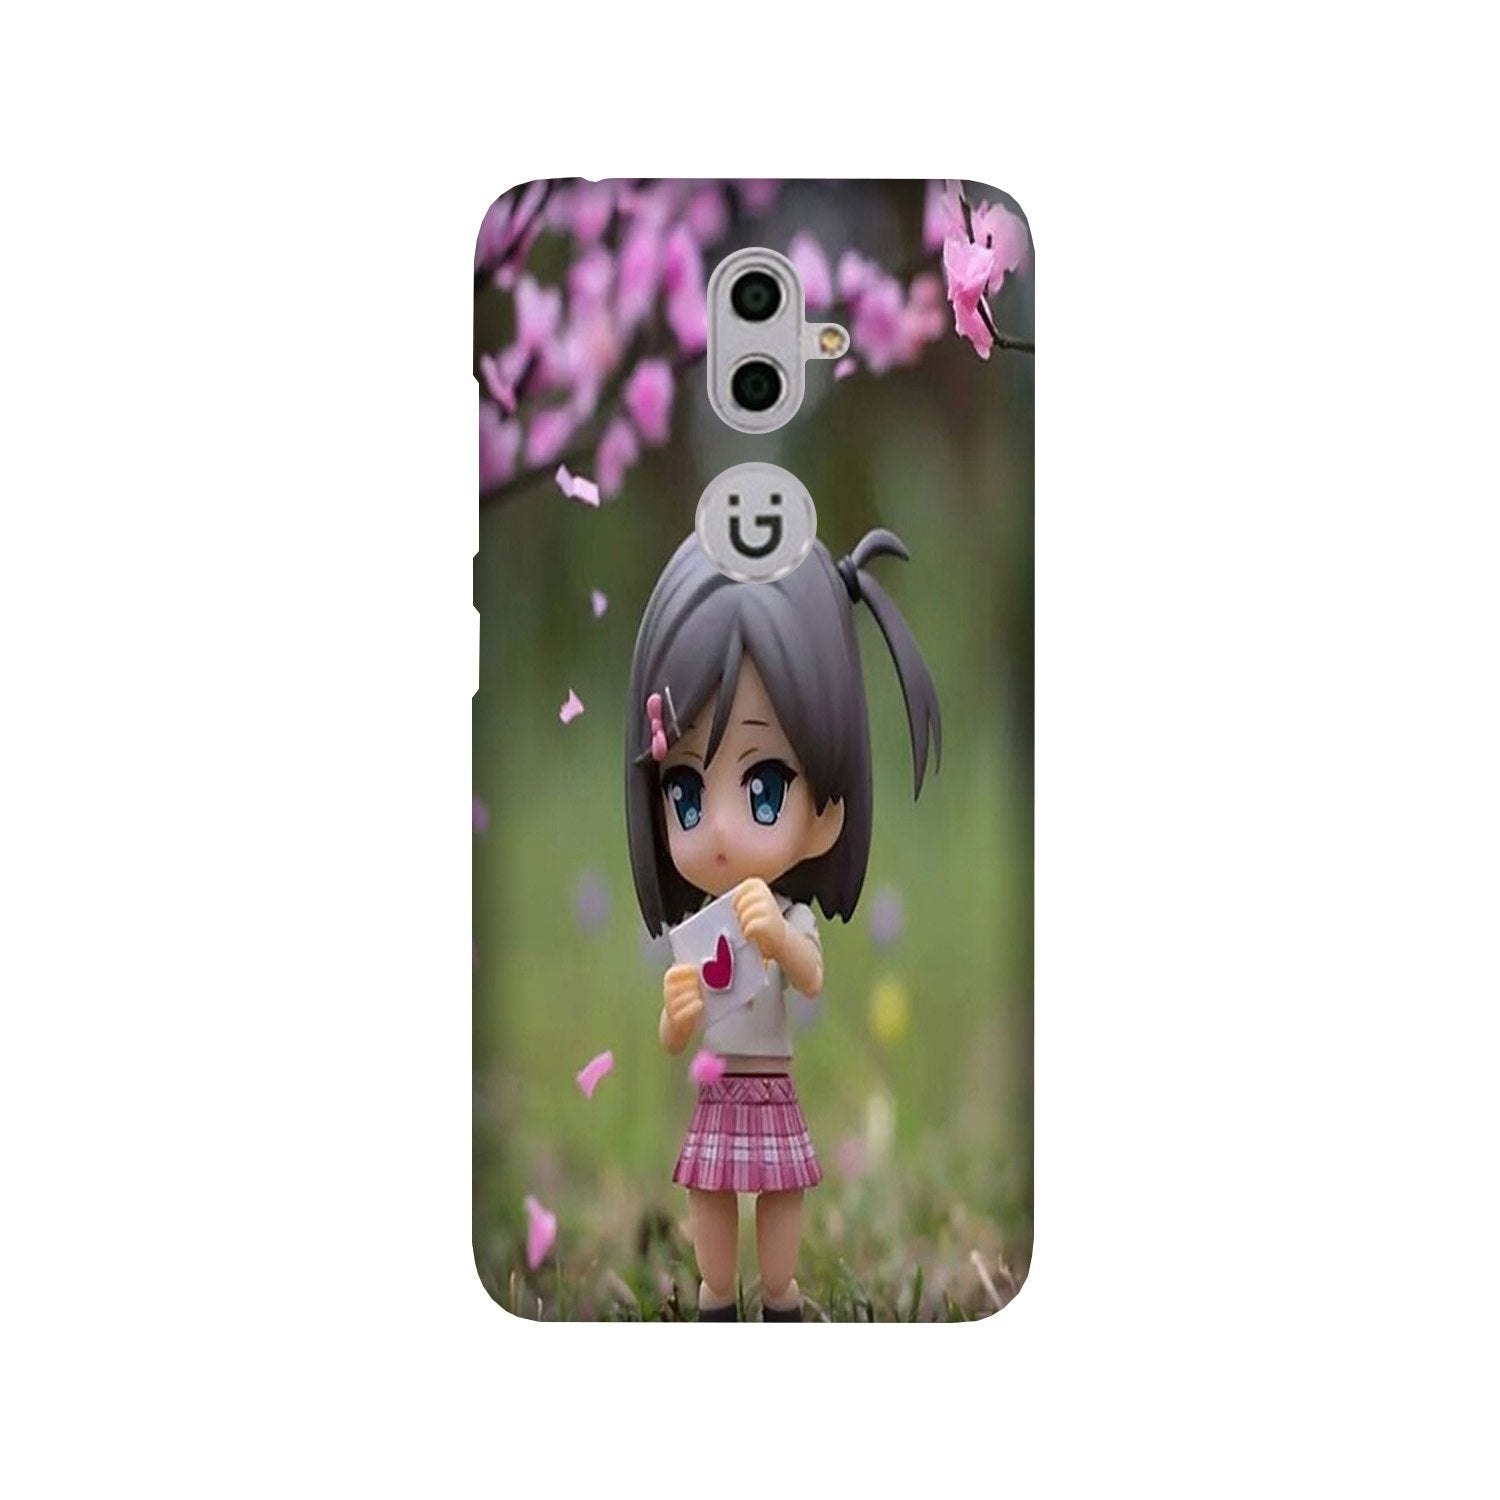 Cute Girl Case for Gionee S9